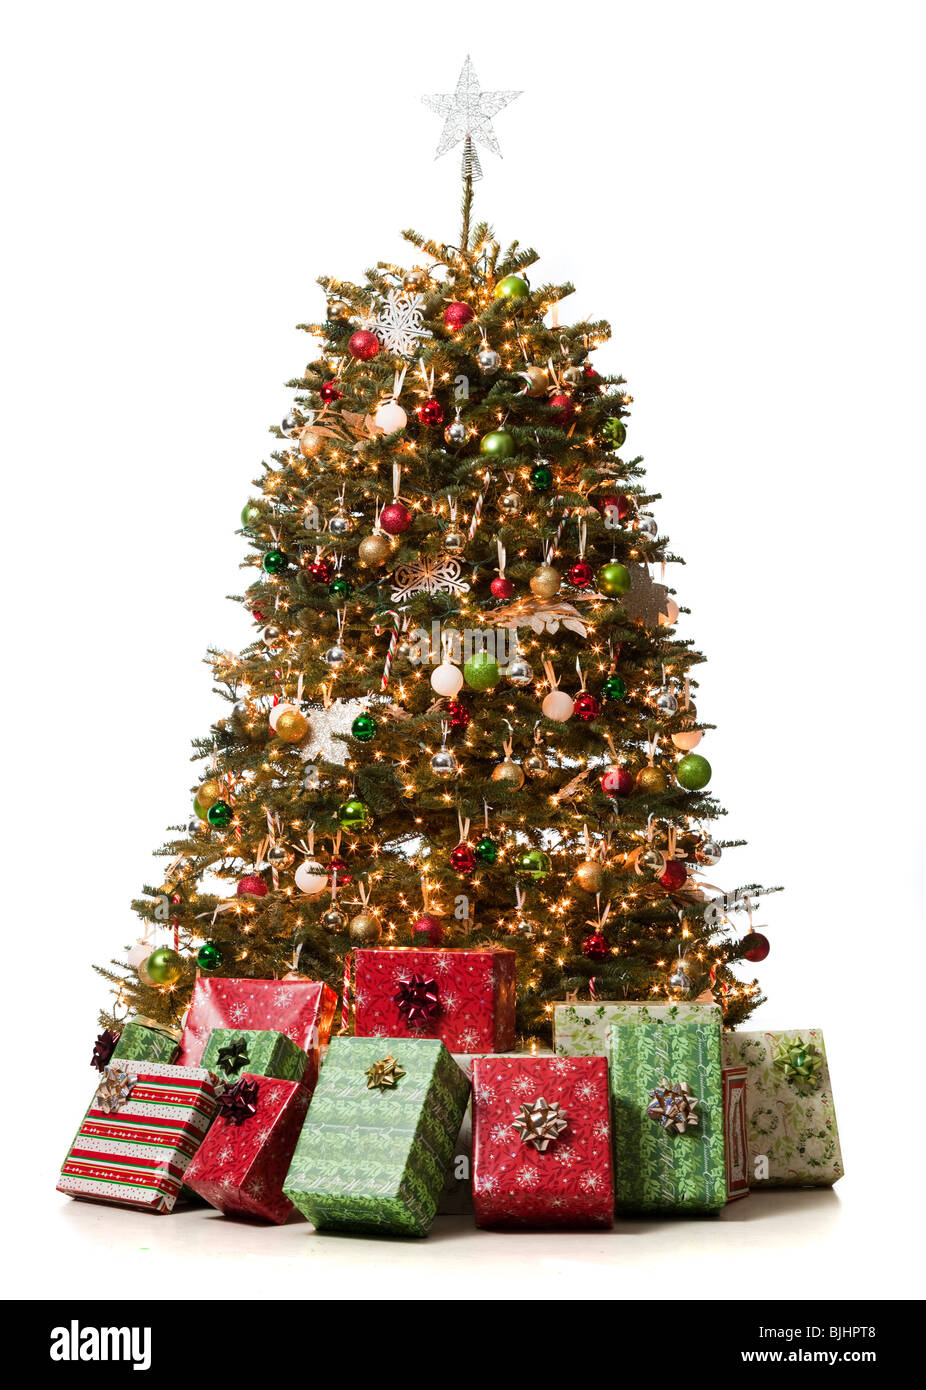 christmas tree with presents underneath it Stock Photo